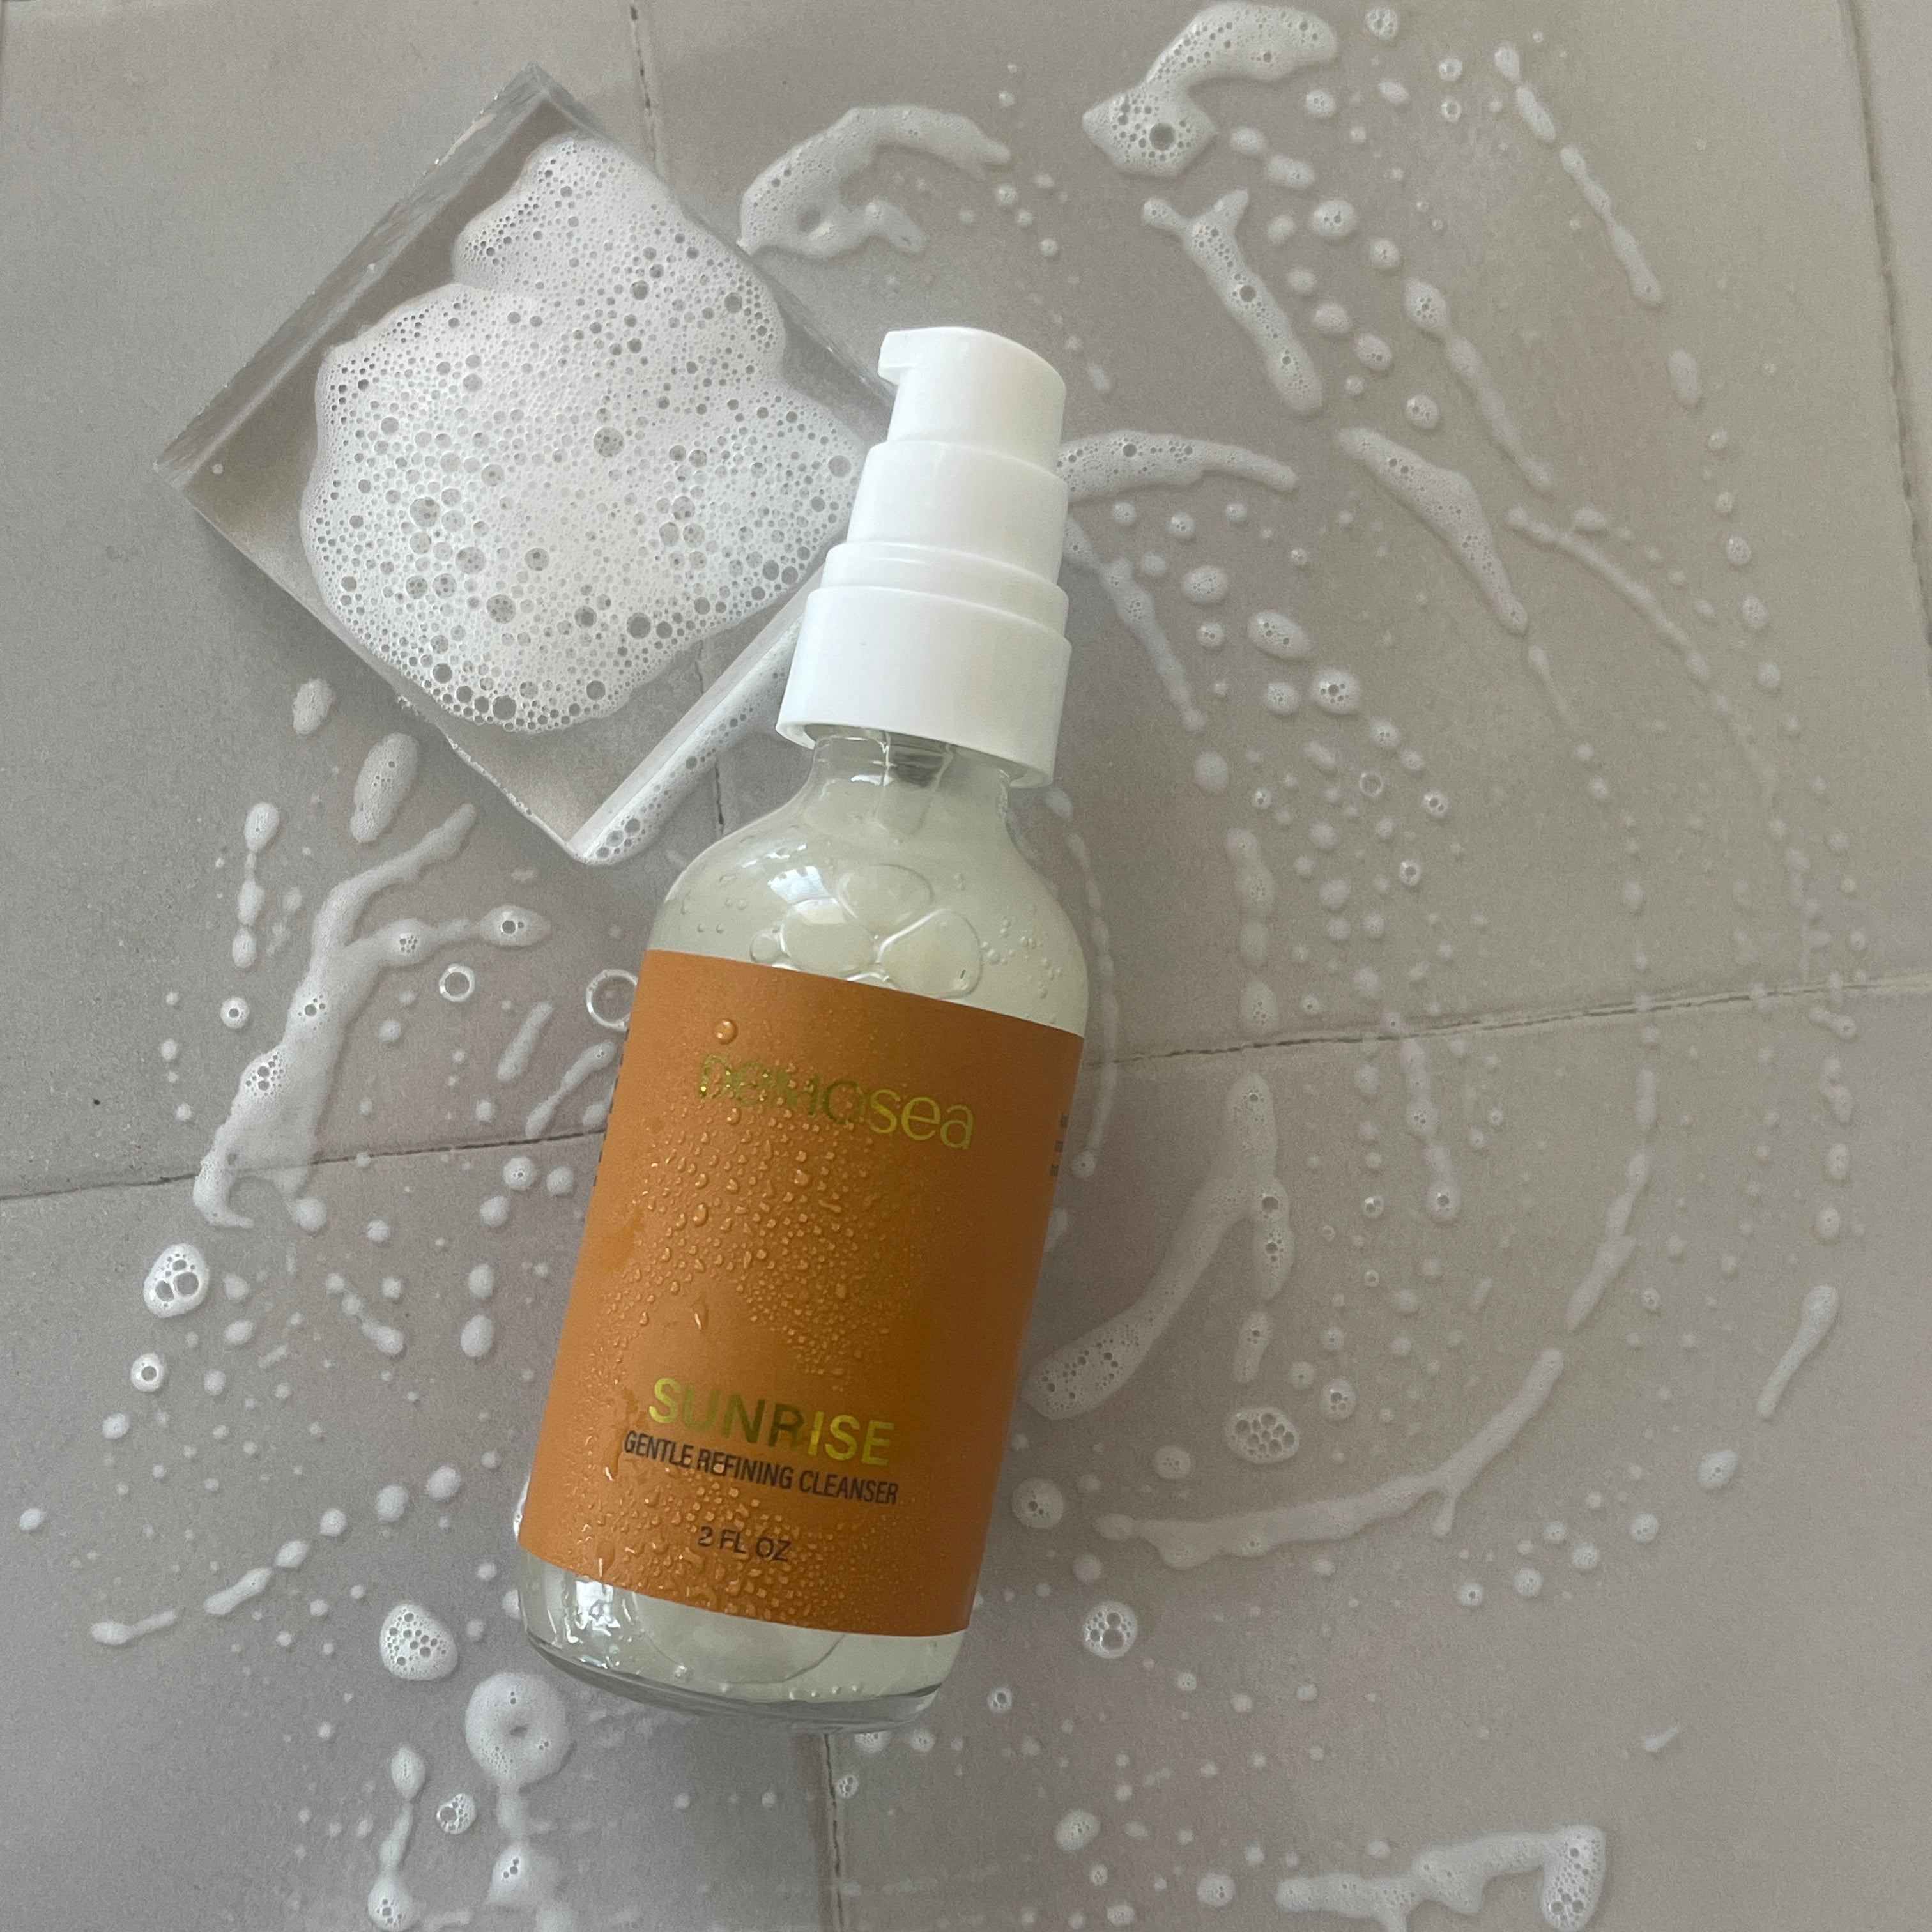 STEP 1: {SUNRISE FACE CLEANSER} A GENTLE CLEANSER FOR SENSITIVE AND DRY SKIN